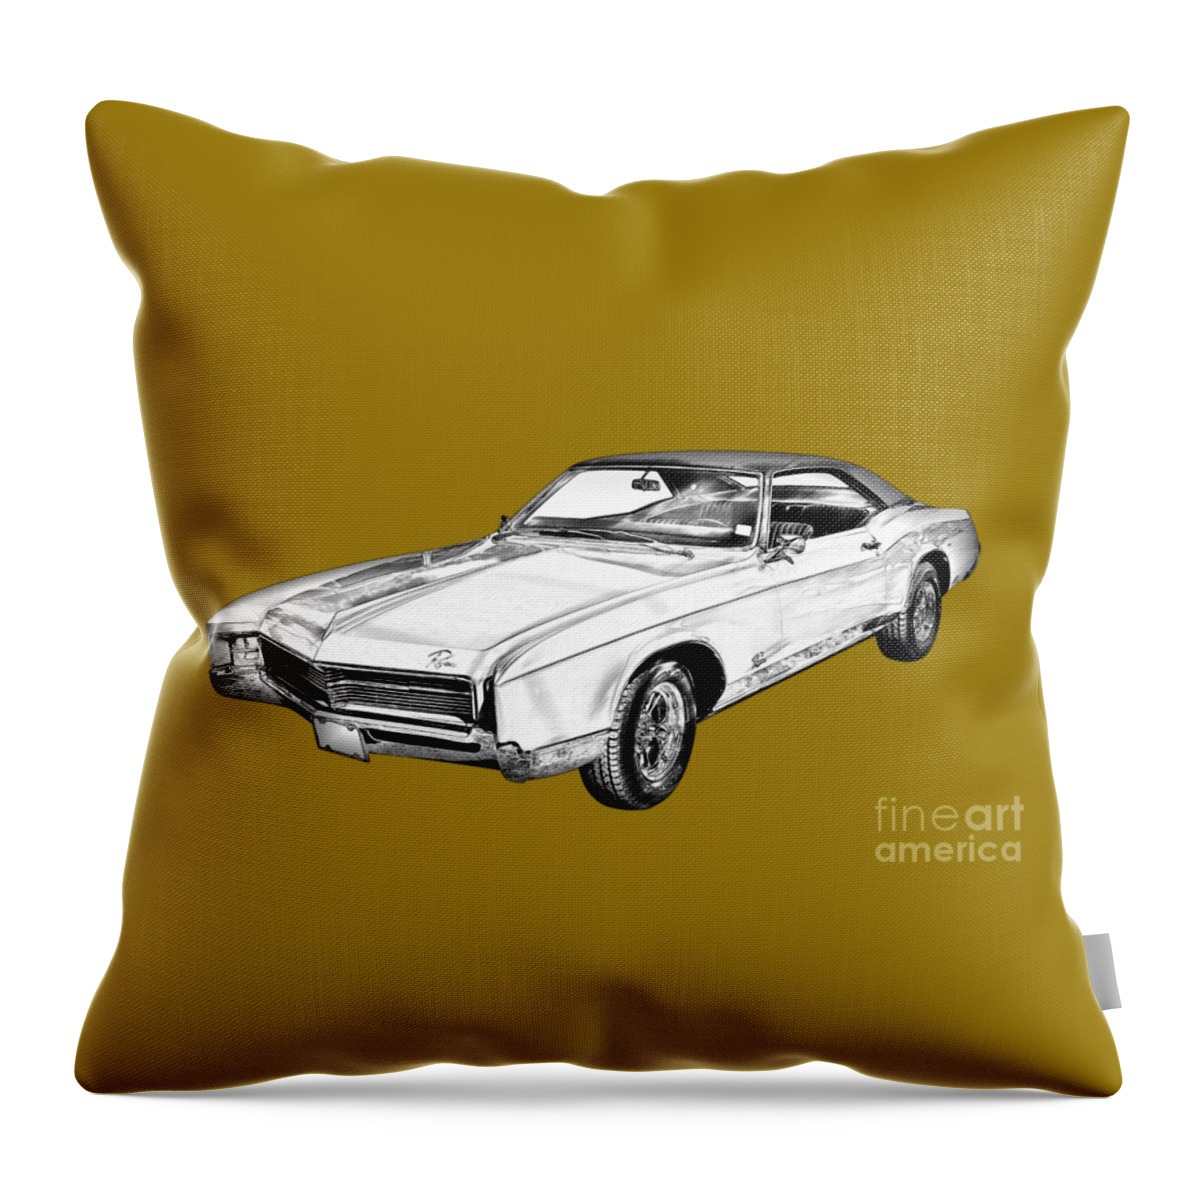 1967 Buick Riviera Throw Pillow featuring the photograph 1967 Buick Riviera Drawing by Keith Webber Jr